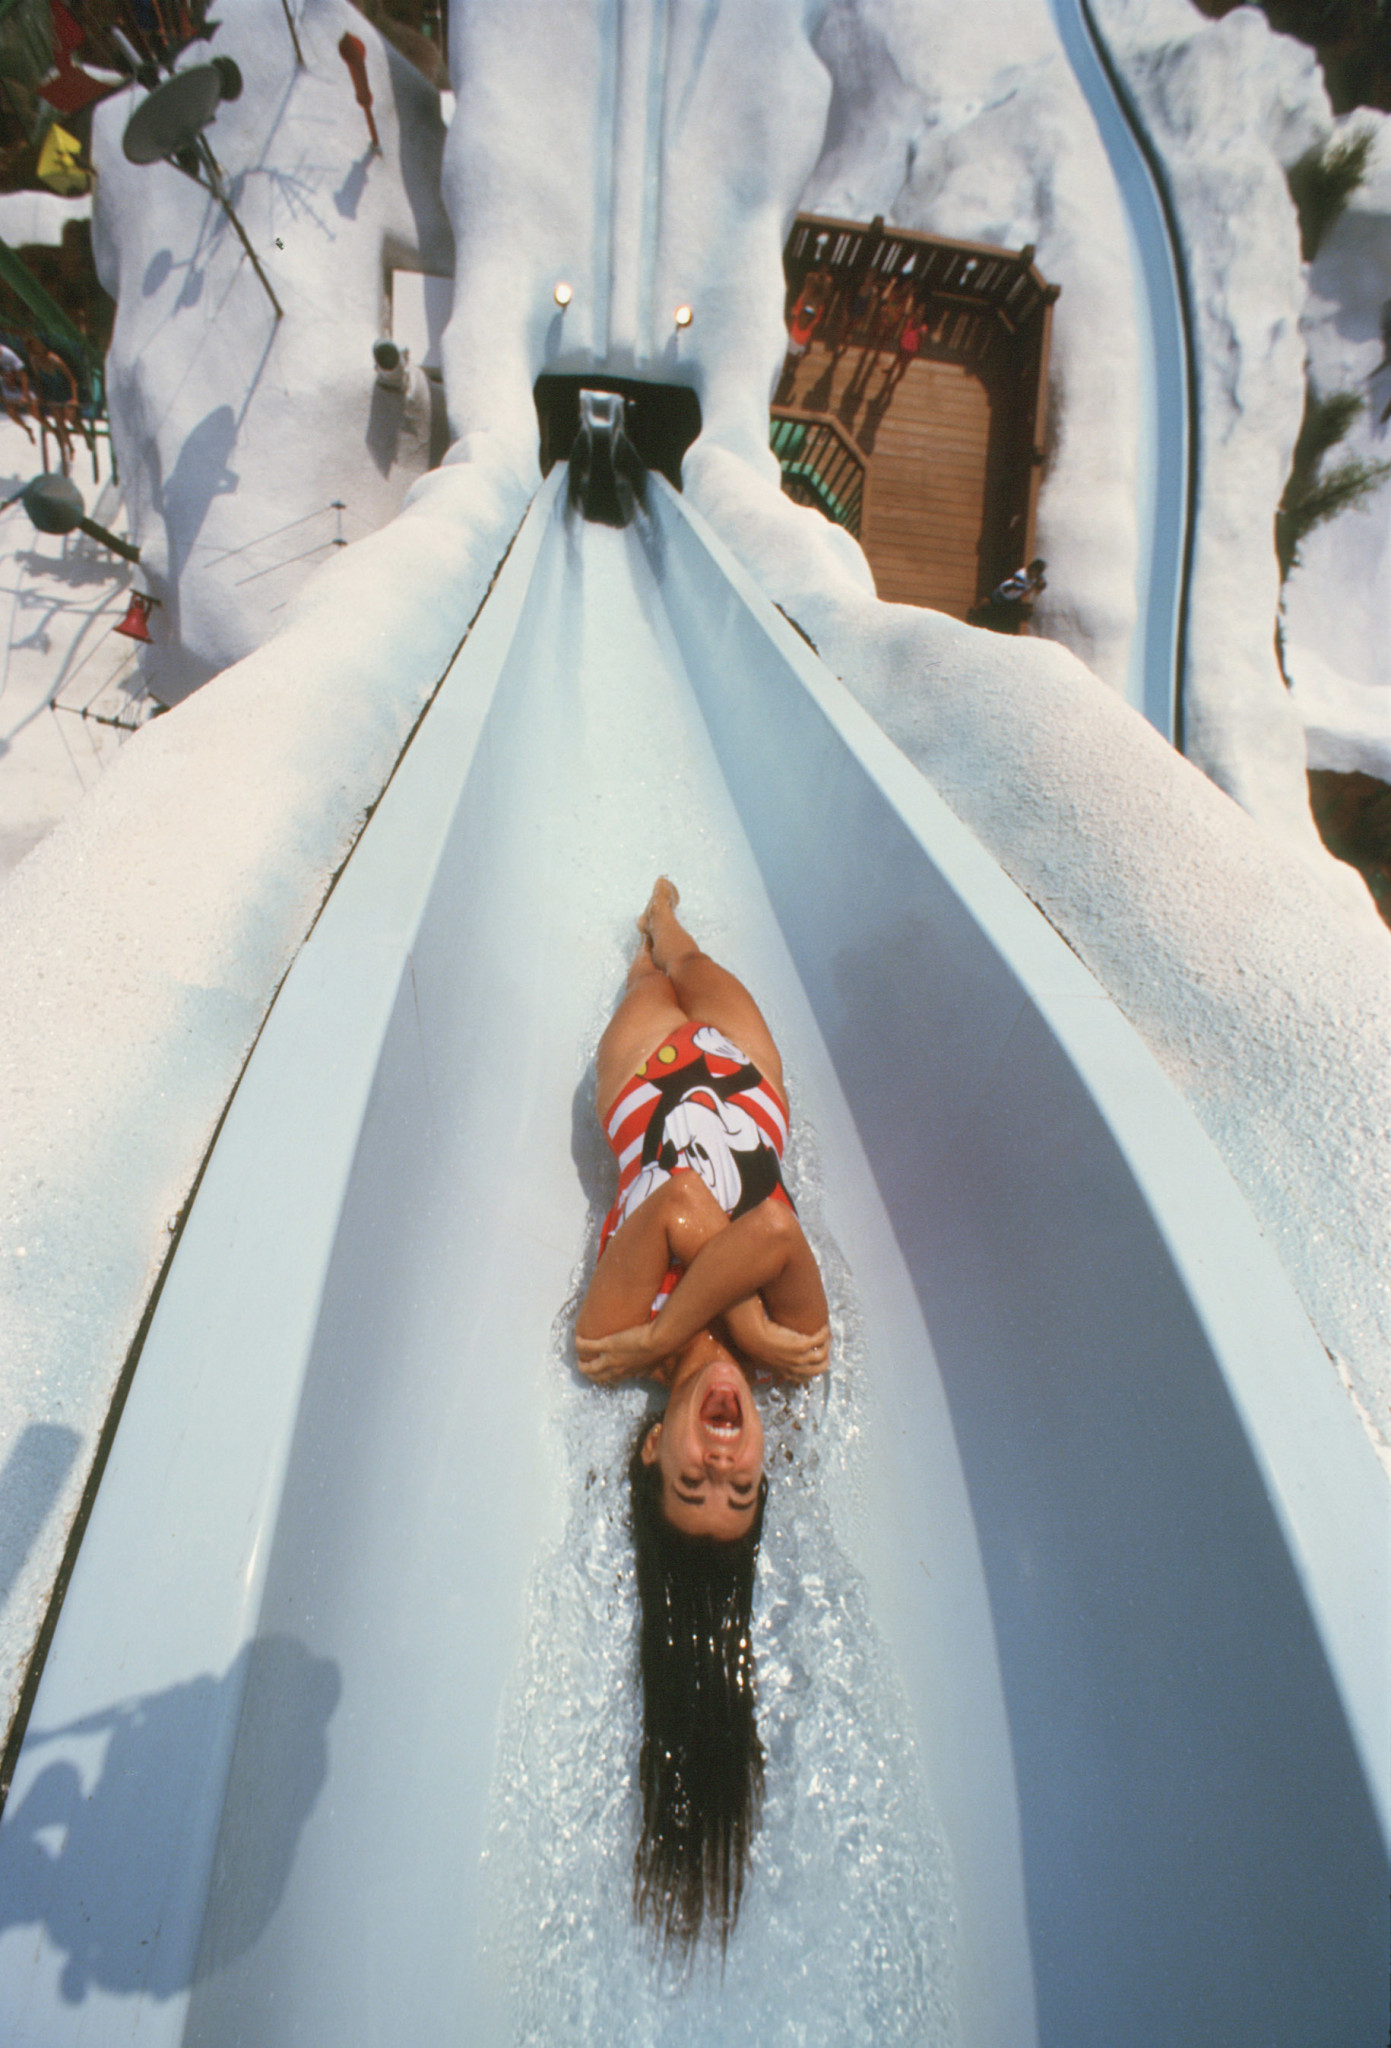 Disney Water Parks—Are They Worth It?